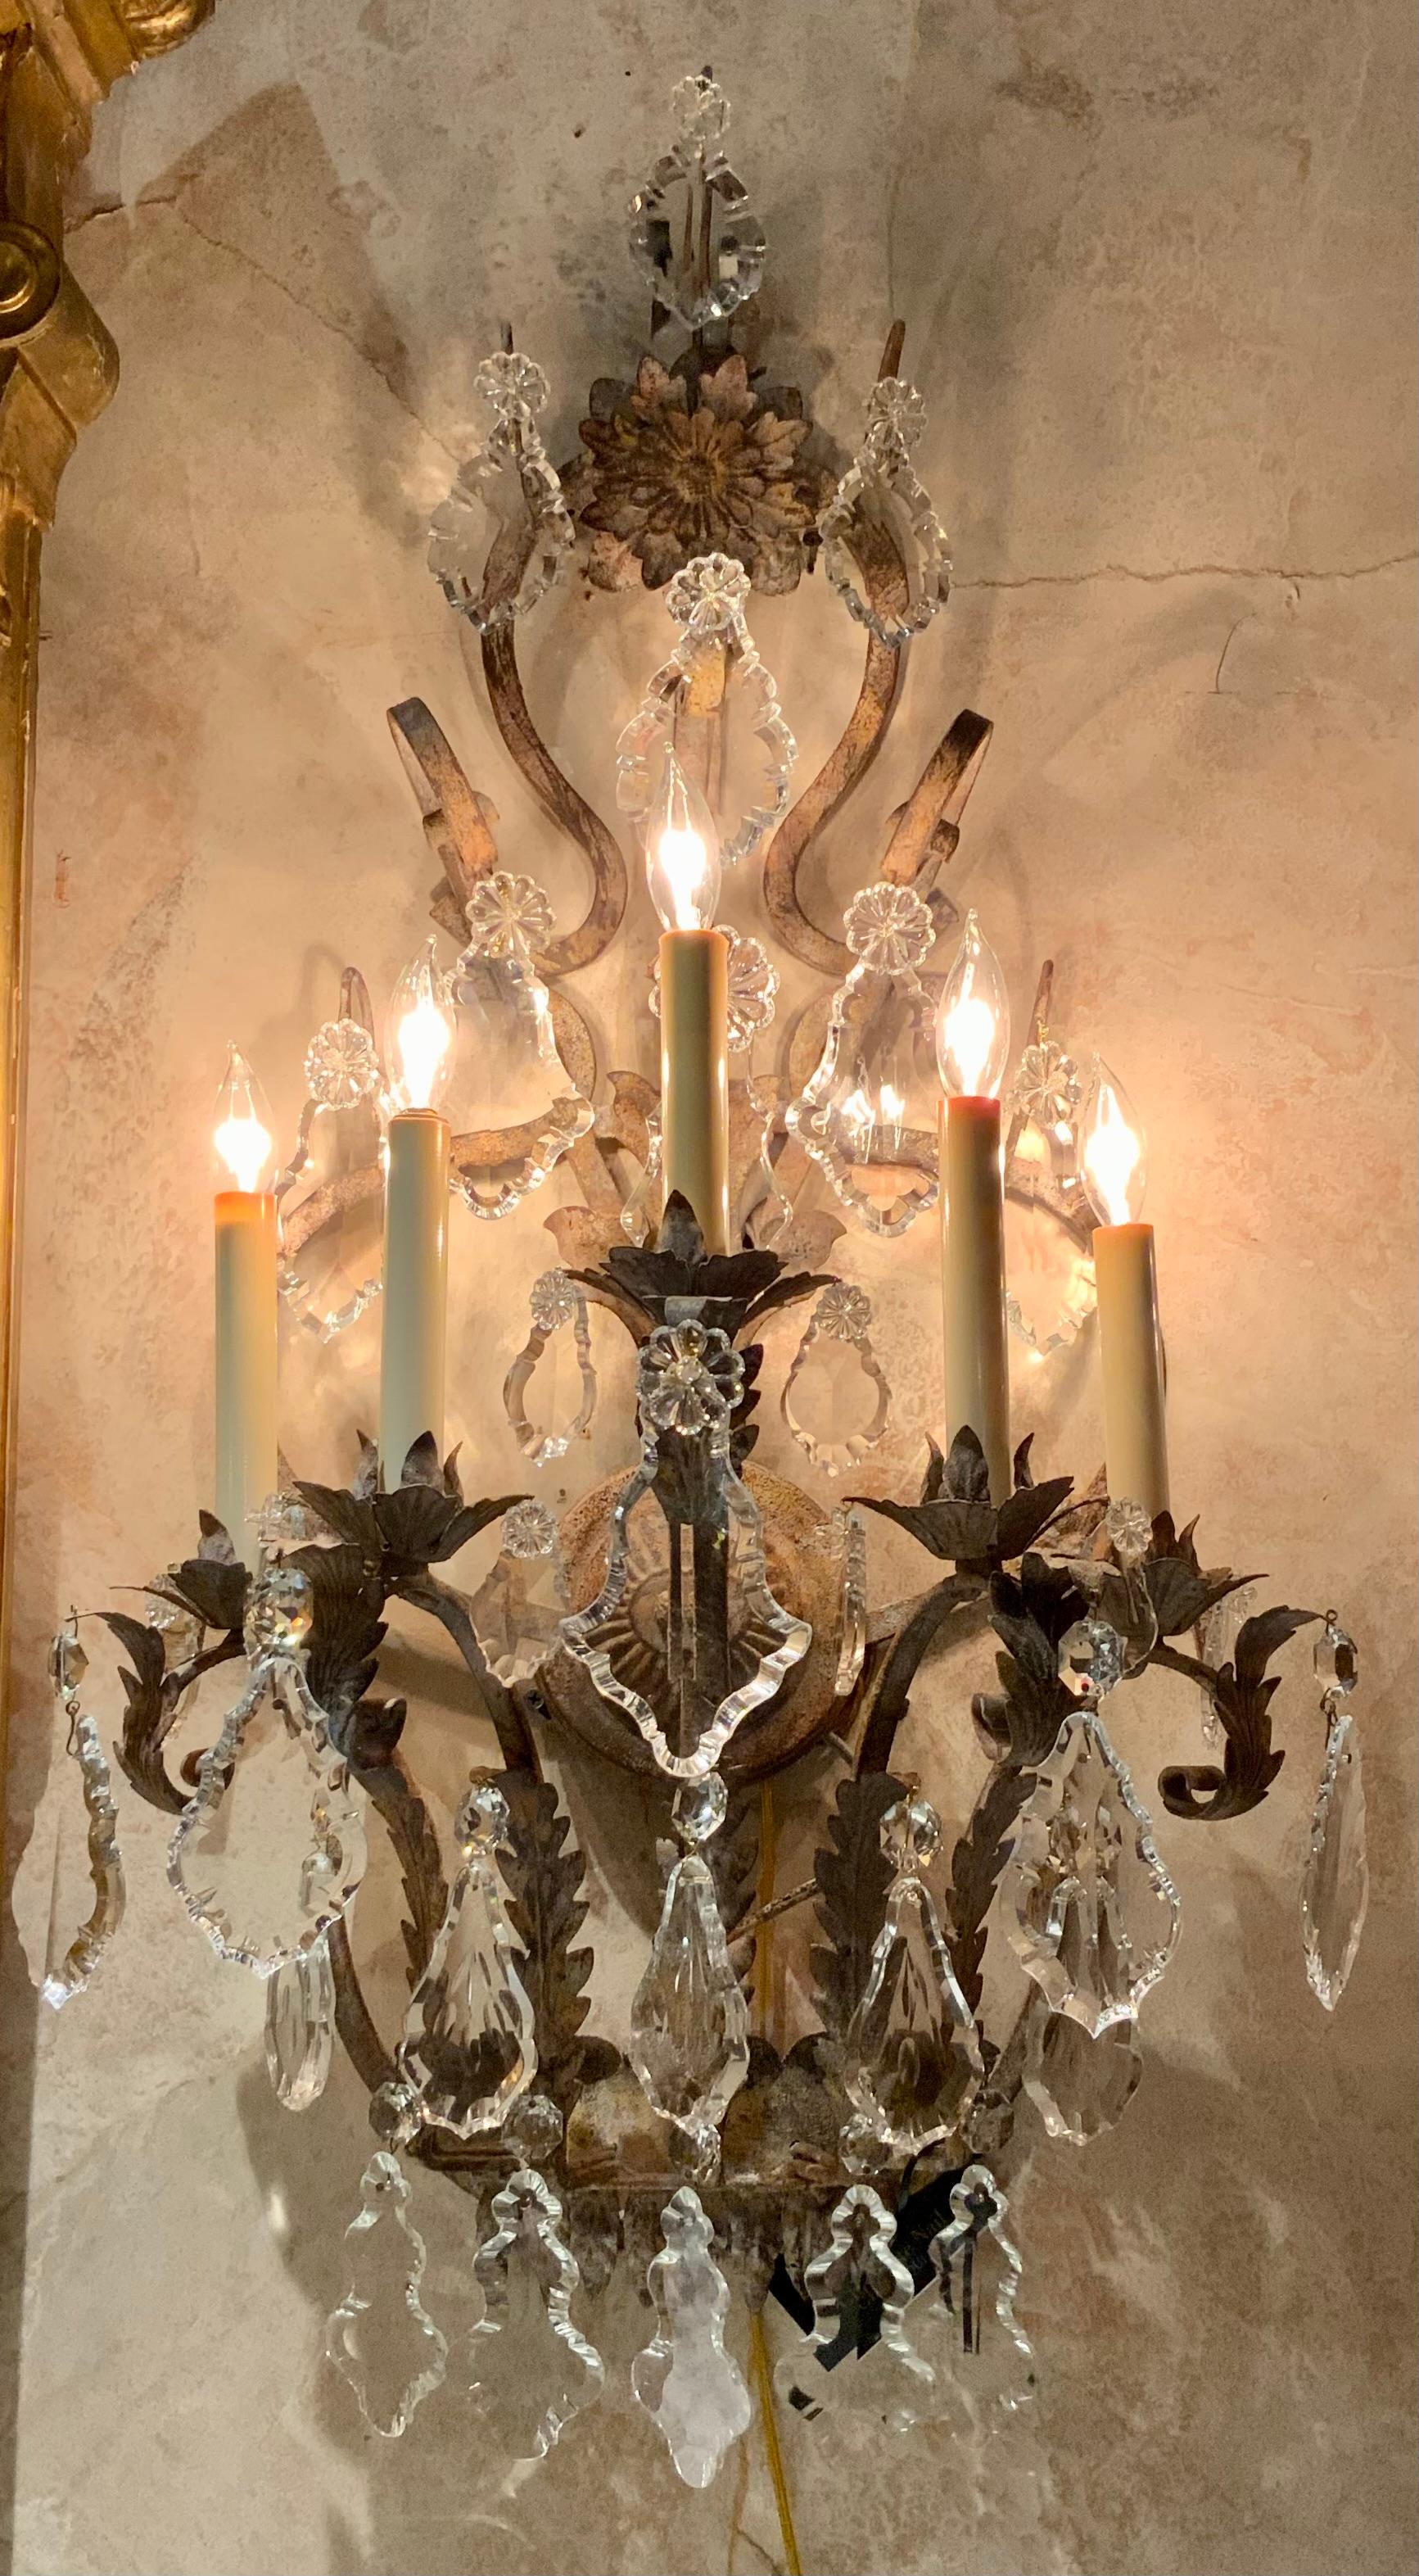 The unique shape of this piece is special with an antique
Painted finish in a rustic fashion. They have new wiring
With five lights in a graduated position supported by scrolling
Arms. A large floral design is positioned at the crest. The
Crystal is